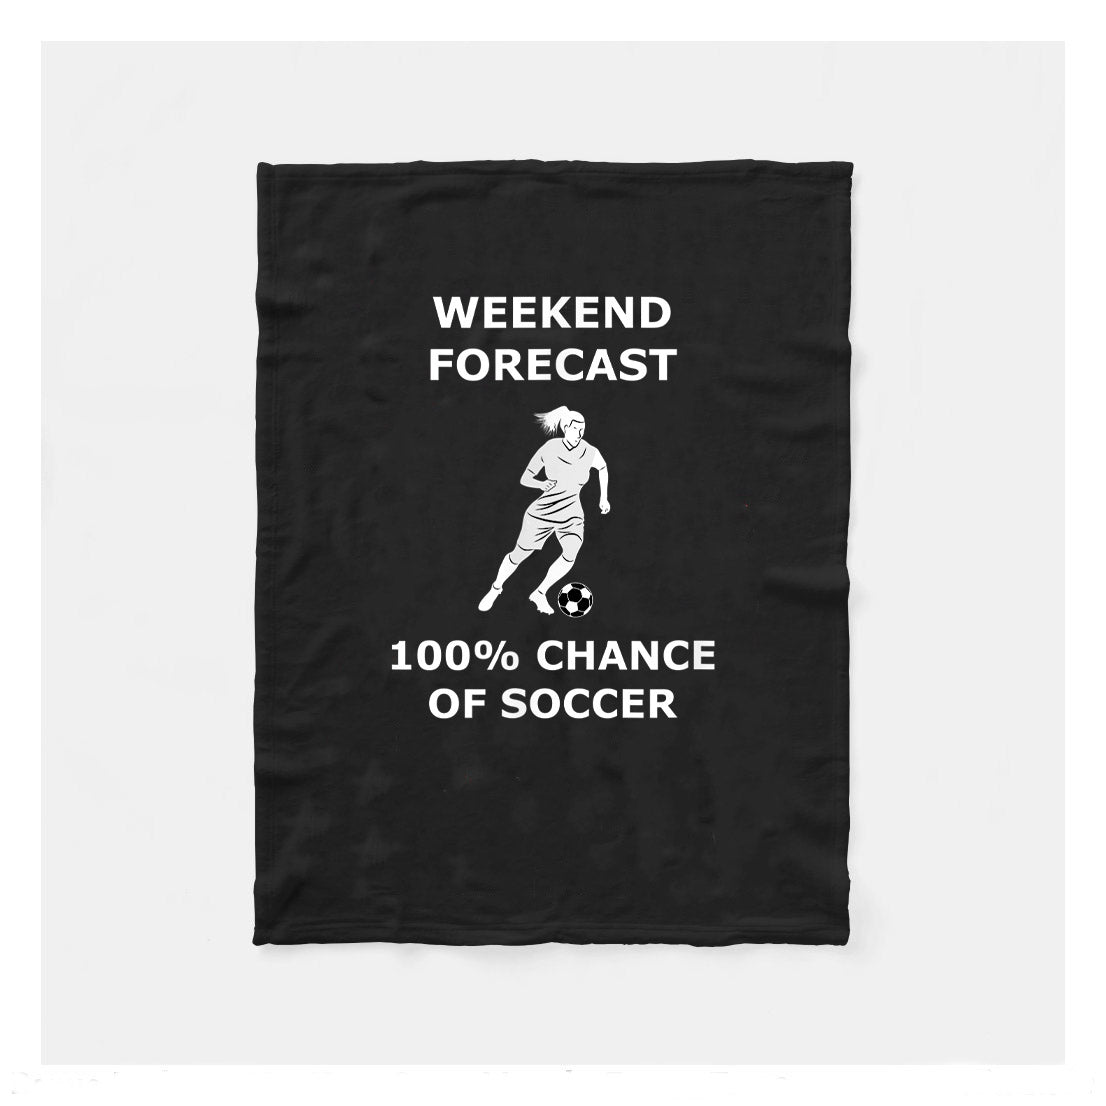 Funny Soccer Blanket Weekend Forecast Soccer Fleece Blanket,  Soccer Outdoor Blankets, Soccer Gifts For Coach And Soccer Players, Birthday Gift For Soccer Player